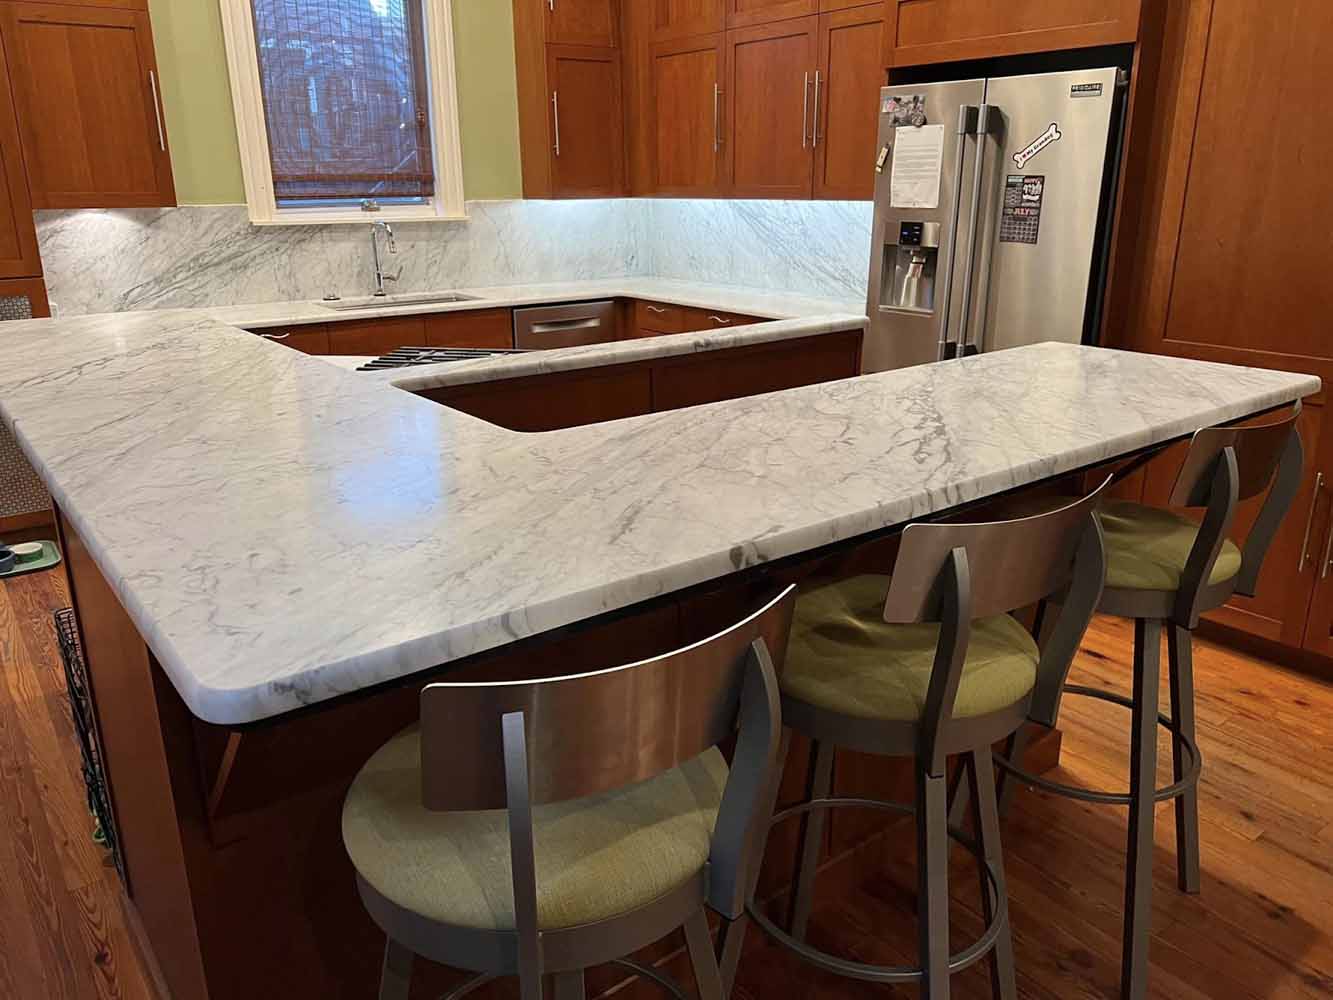 Continue the same material used for your countertops up the wall for your backsplash to create a cohesive look, like this BK Martin kitchen remodel.